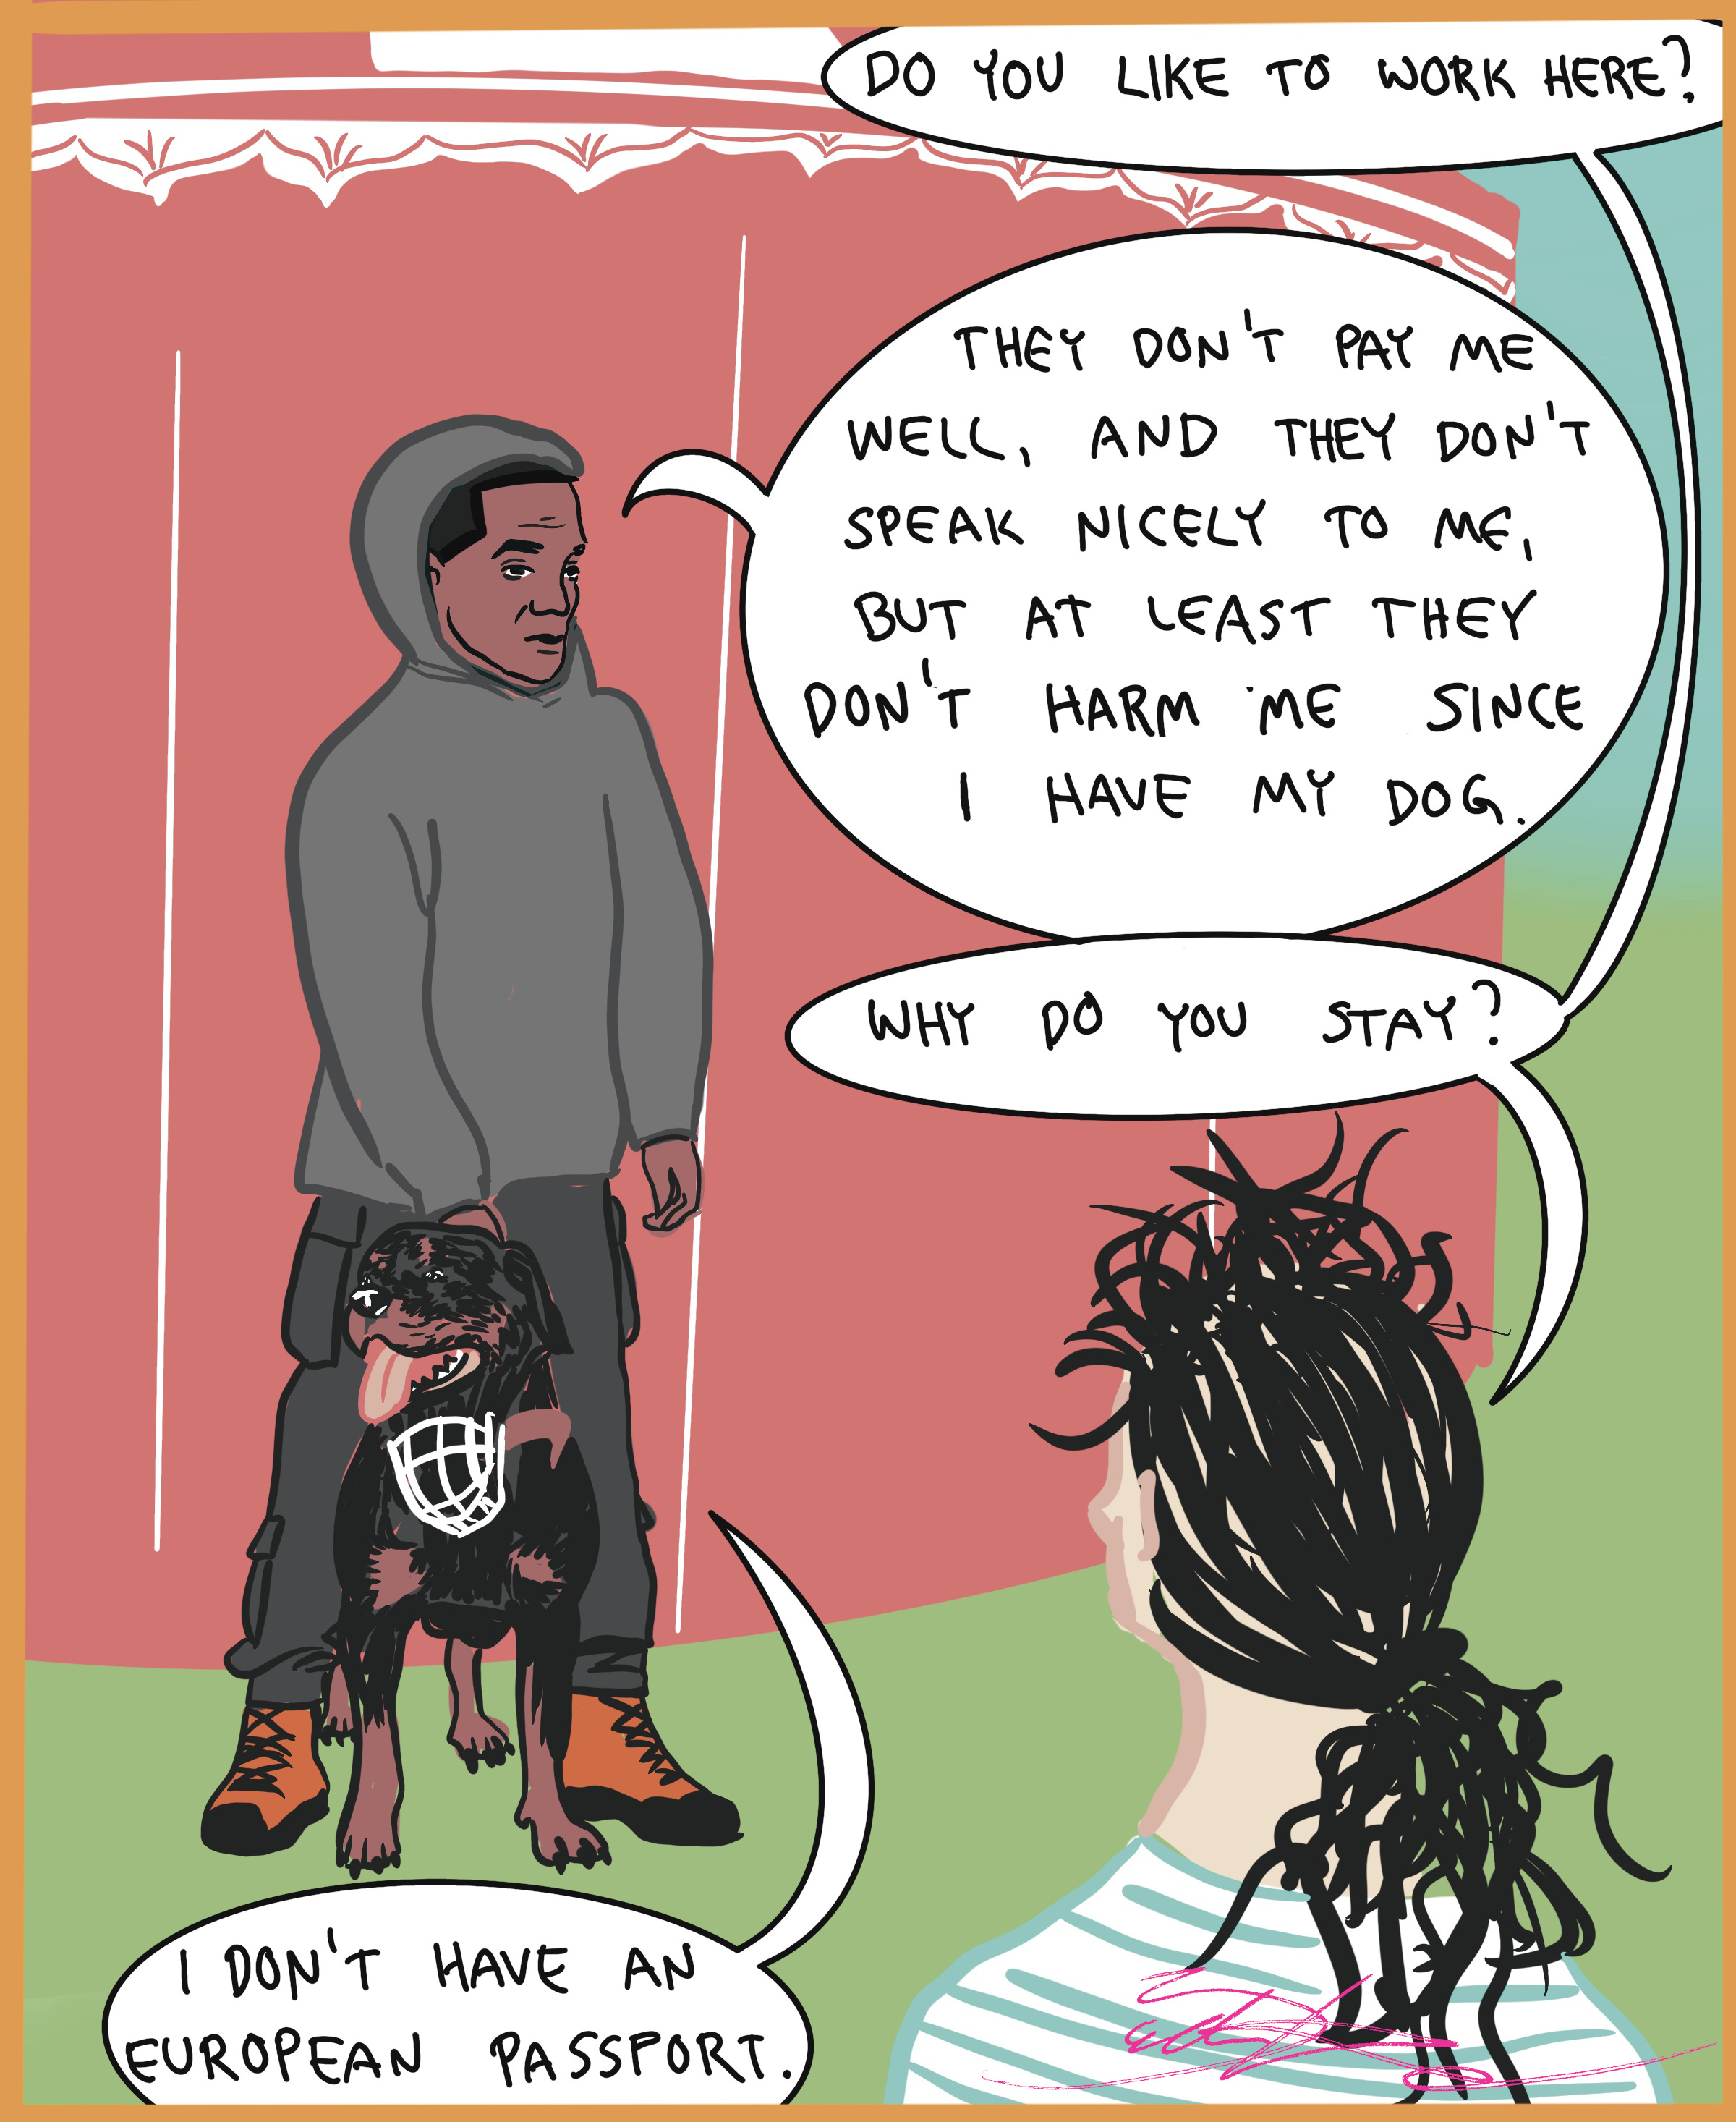 In the fifth illustration of the It’s not a game -series, a white person discusses with a black person. Both stand in front of the circus tent, the black person has a fighting dog with him. White person asks: ”do you like to work here?”. Black person answers: ”They don’t pay me well, and they don’t speak nicely to me, but at least they don’t harm me since I have my dog.” ”Why do you stay?” asks the white person. ”I don’t have an european passport” replies the black person.